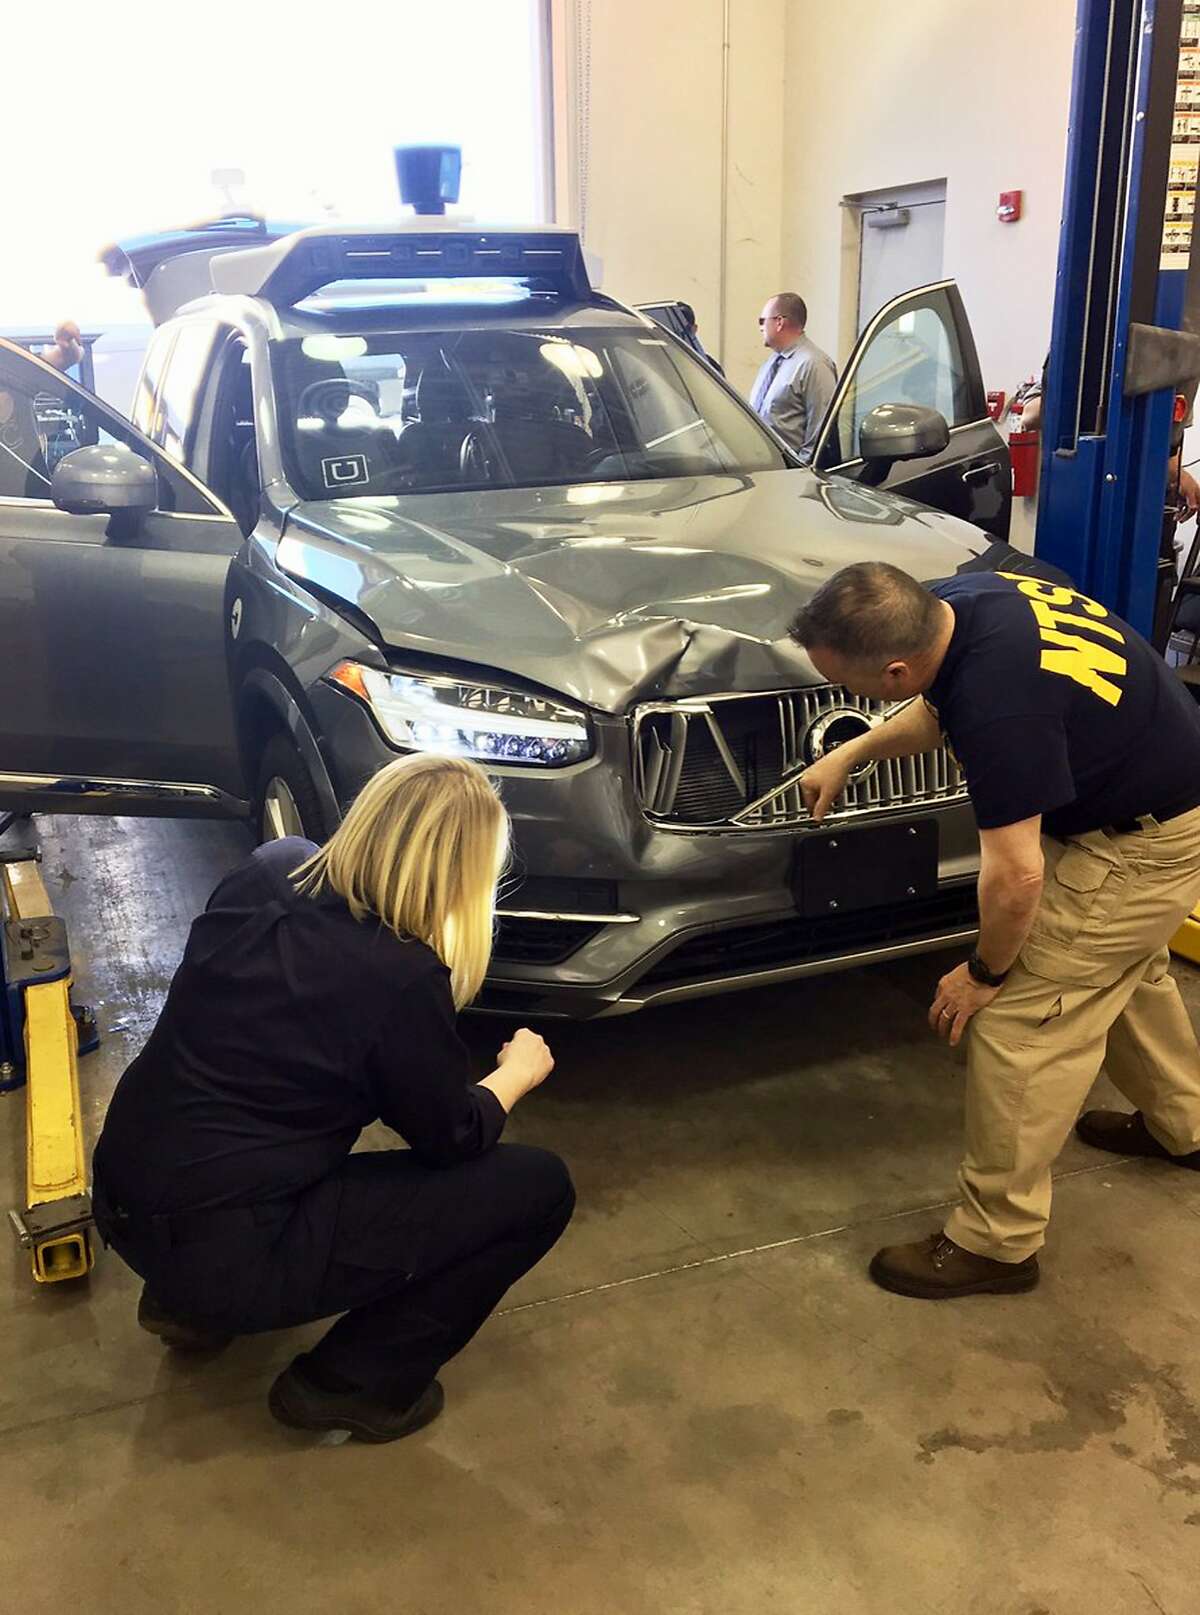 FILE - In this March 20, 2018 file photo provided by the National Transportation Safety Board, investigators examine a driverless Uber SUV that fatally struck a woman in Tempe, Ariz. An Arizona police report says the human backup driver the Uber autonomous SUV was streaming a television show on Hulu just before the vehicle struck and killed a pedestrian in March. The Arizona Republic reported that the driver was watching �The Voice,� a television musical talent show. The newspaper received the more than 300-page report from Tempe police on Thursday, June 21. (National Transportation Safety Board via AP)